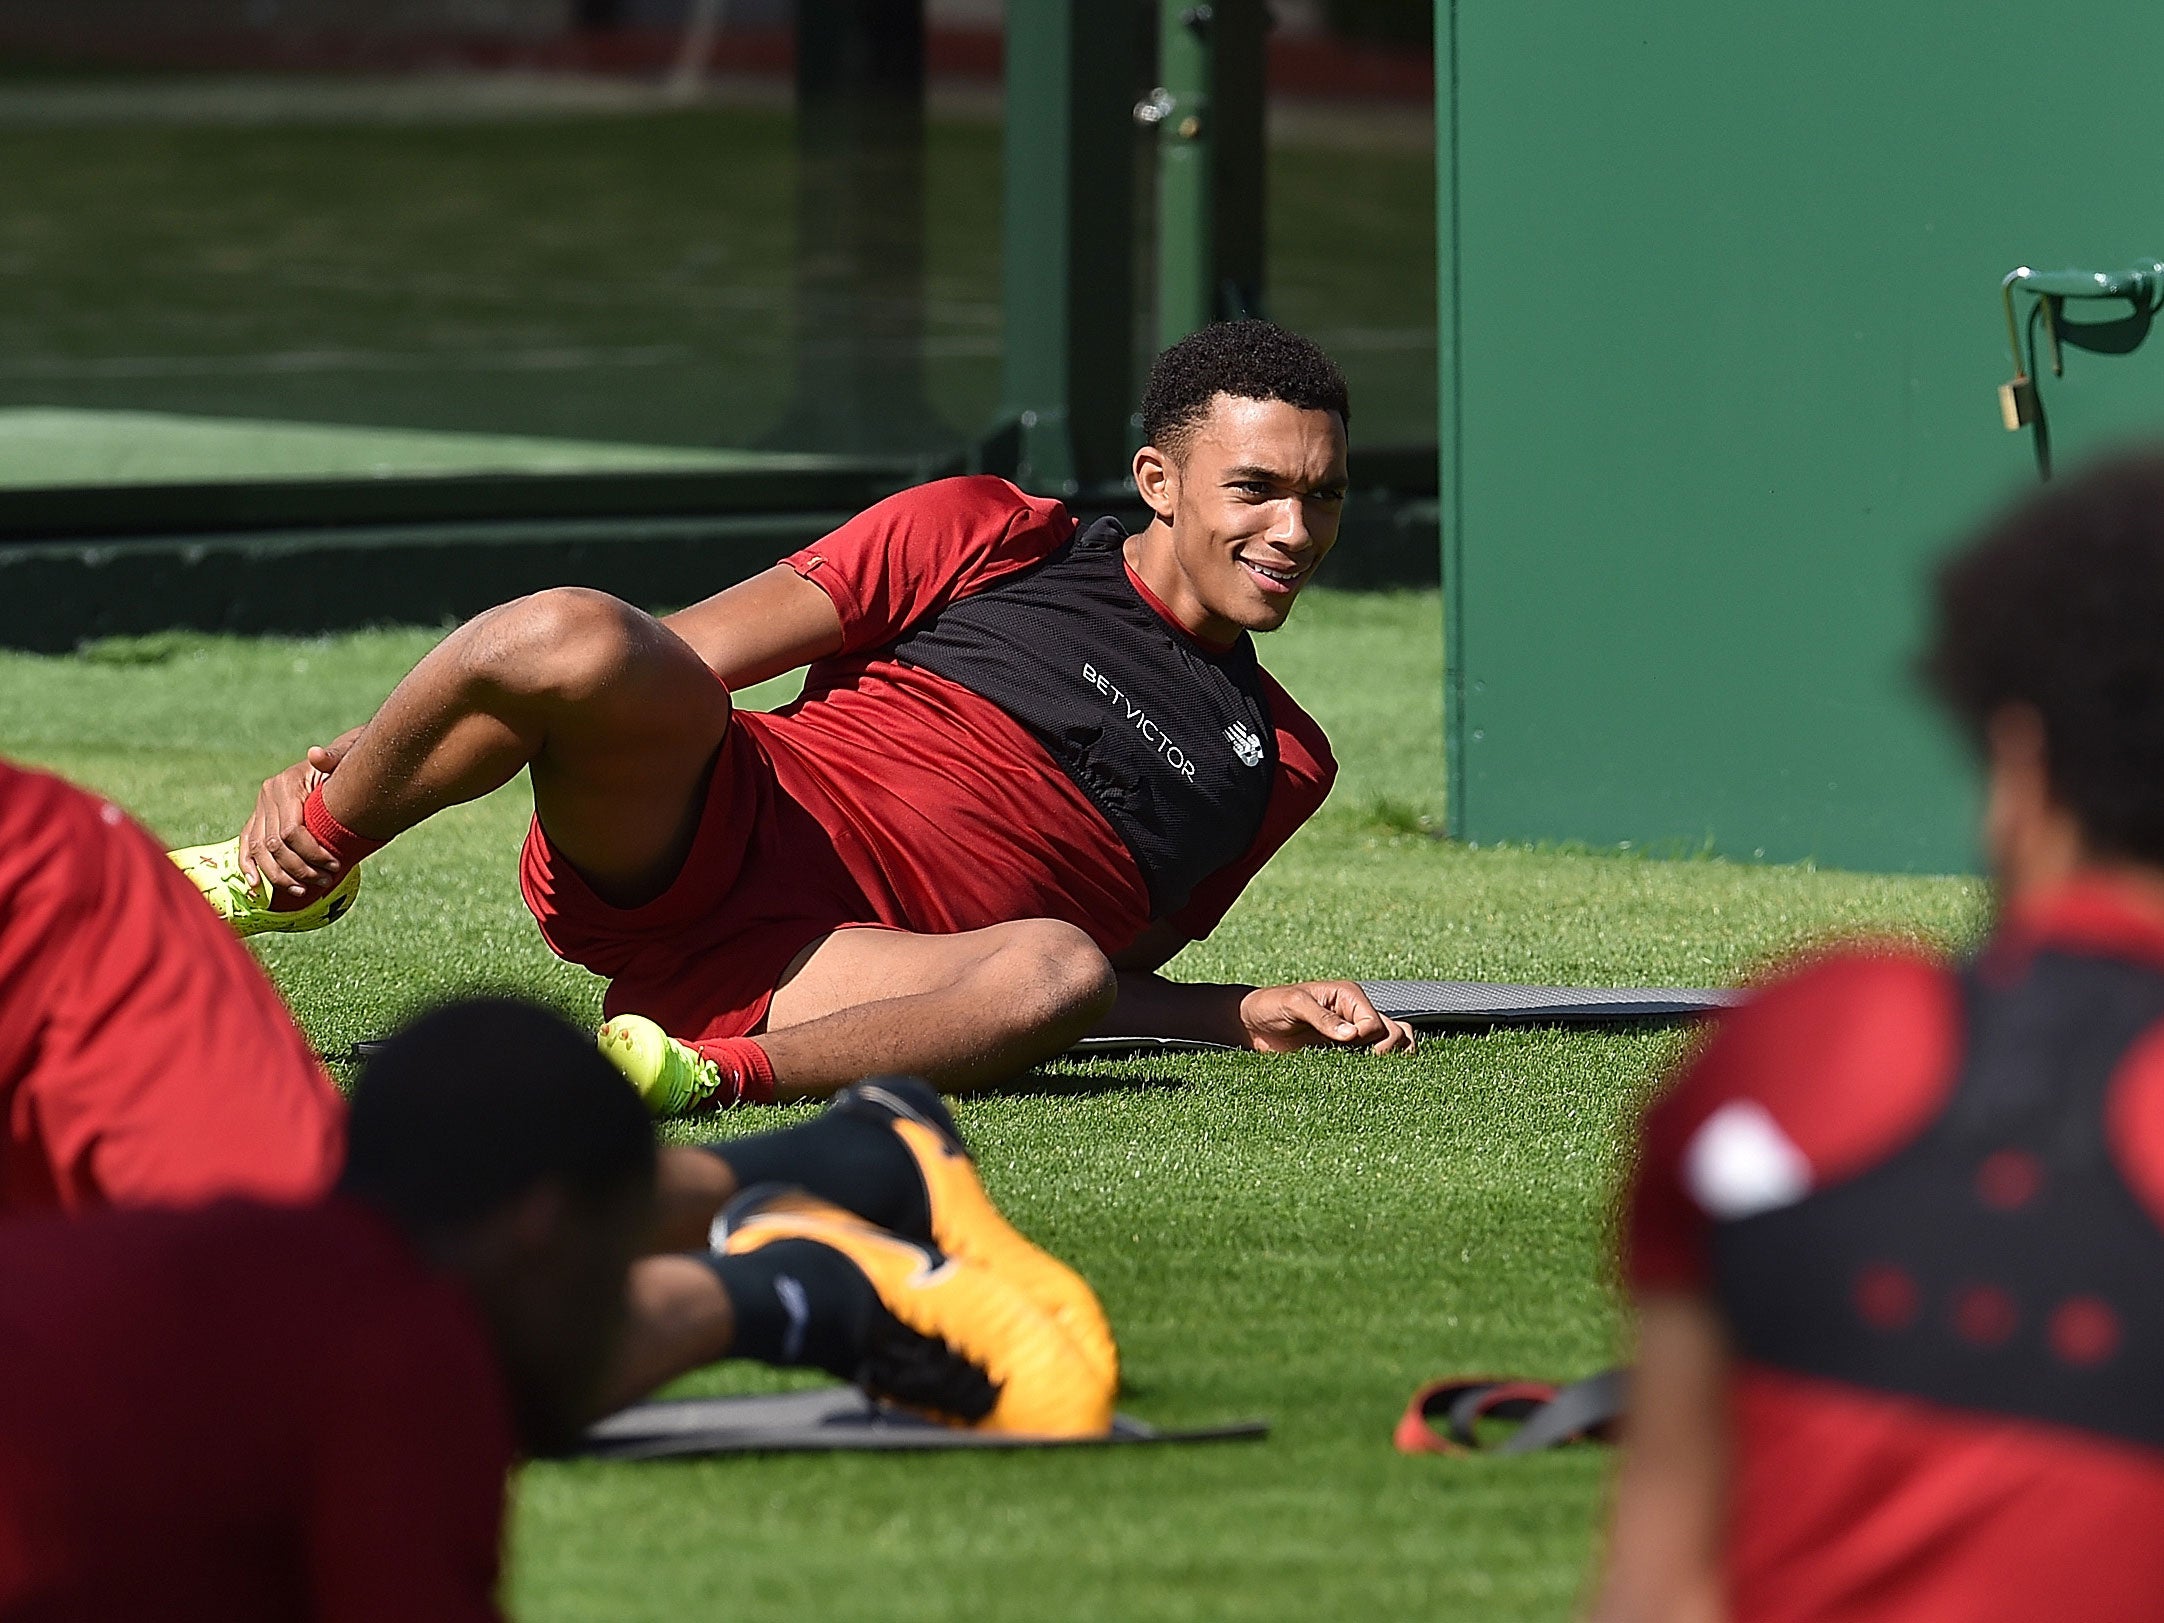 Trent Alexander-Arnold has replaced Nathaniel Clyne at right-back for Liverpool